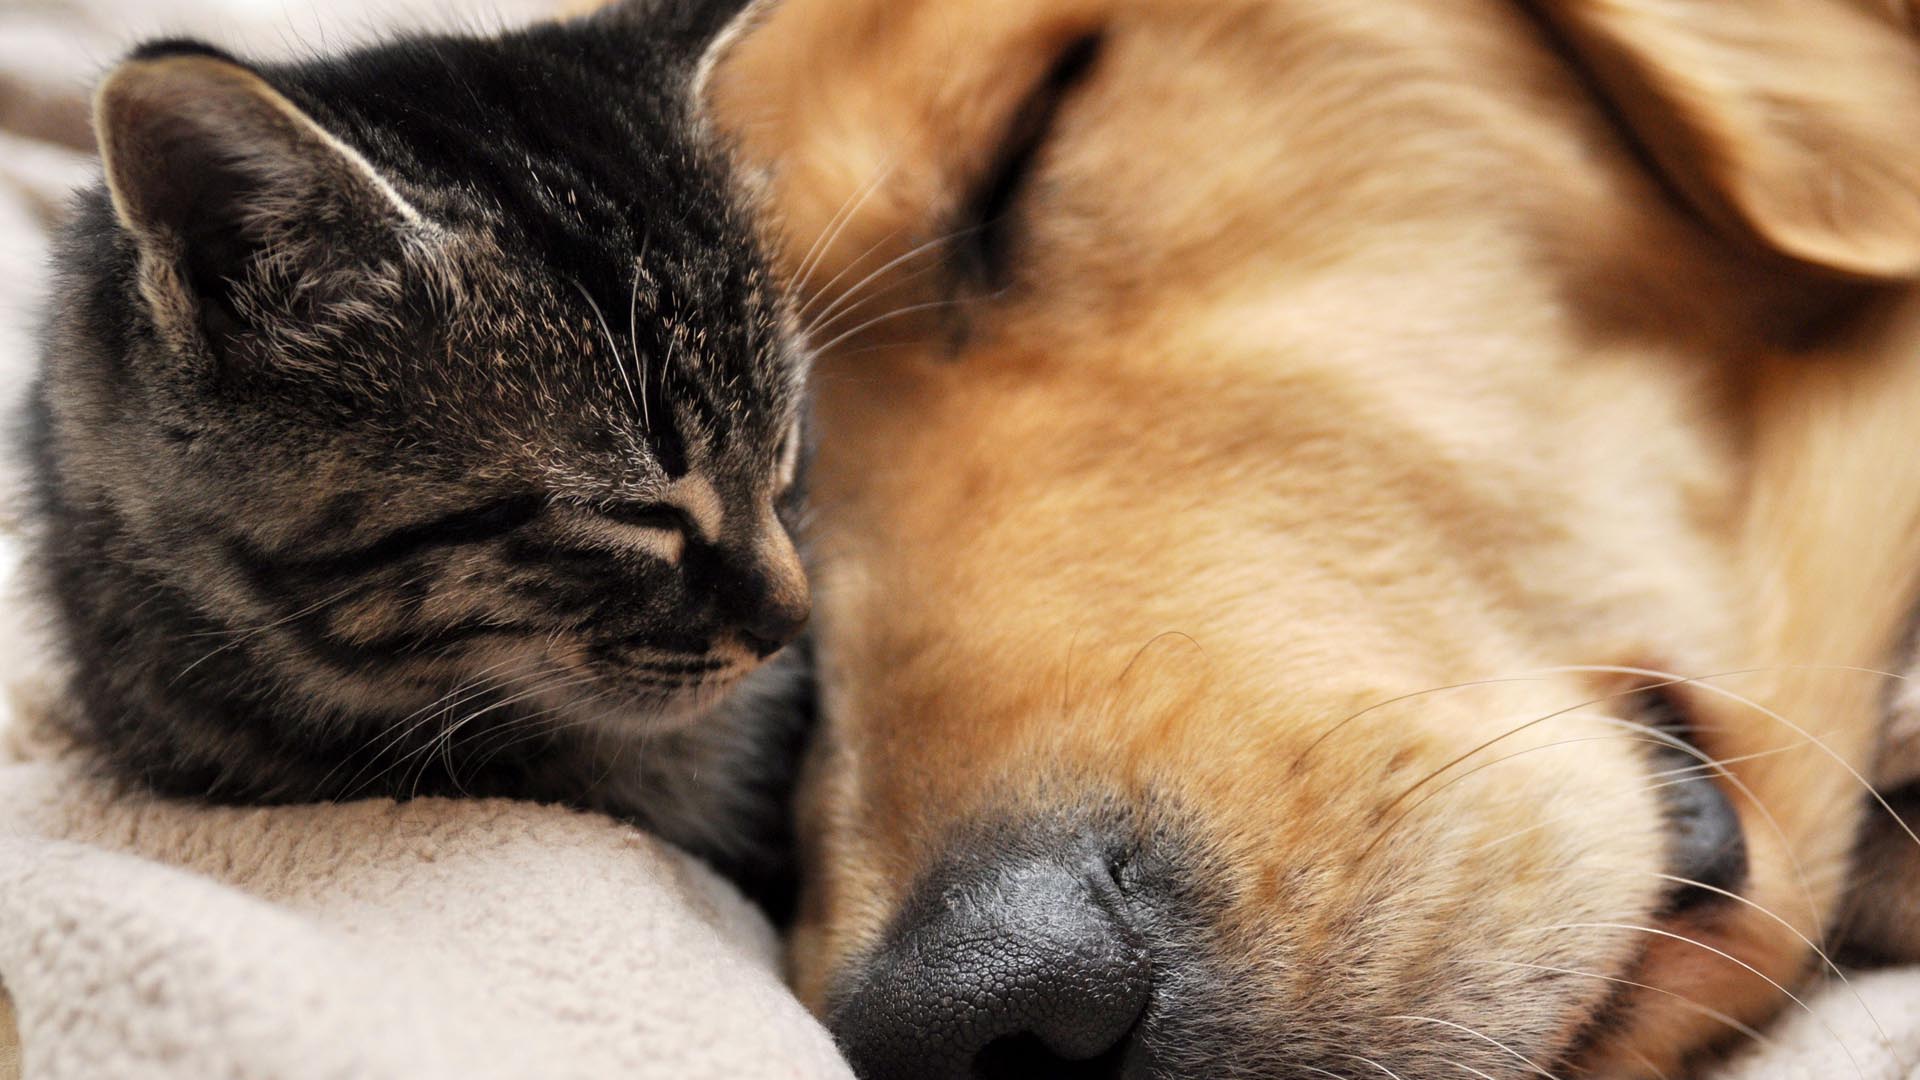 Pics Photos Ideal Of Cat And Dog Cats Dogs Wallpaper